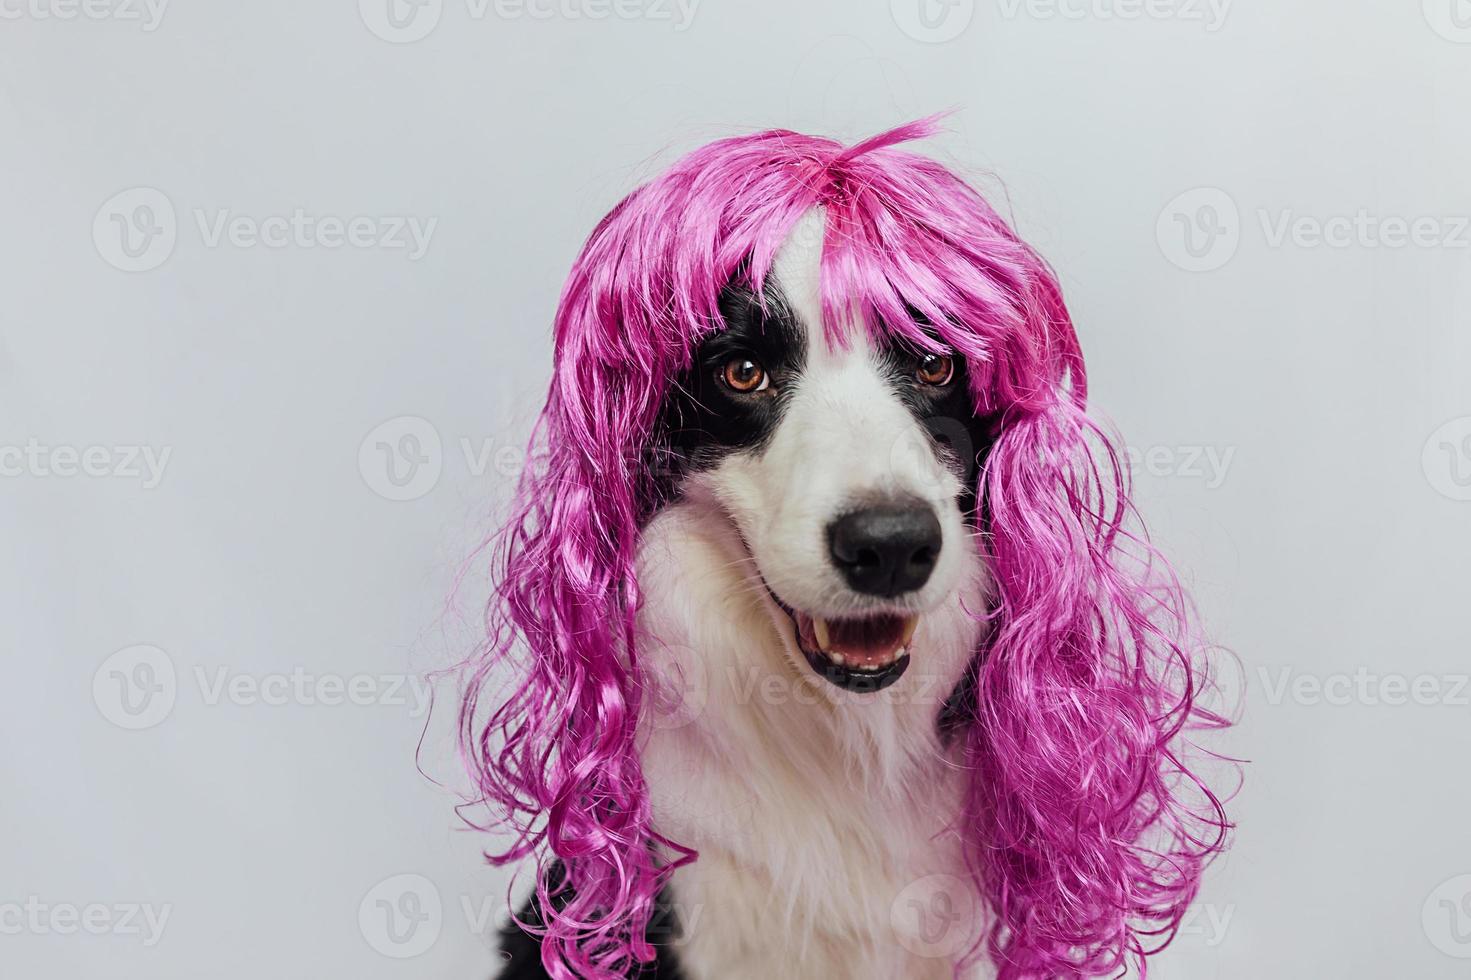 Pet dog border collie wearing colorful curly lilac wig isolated on white background. Funny puppy in pink wig in carnival or halloween party. Emotional pet muzzle. Grooming barber hairdresser concept. photo